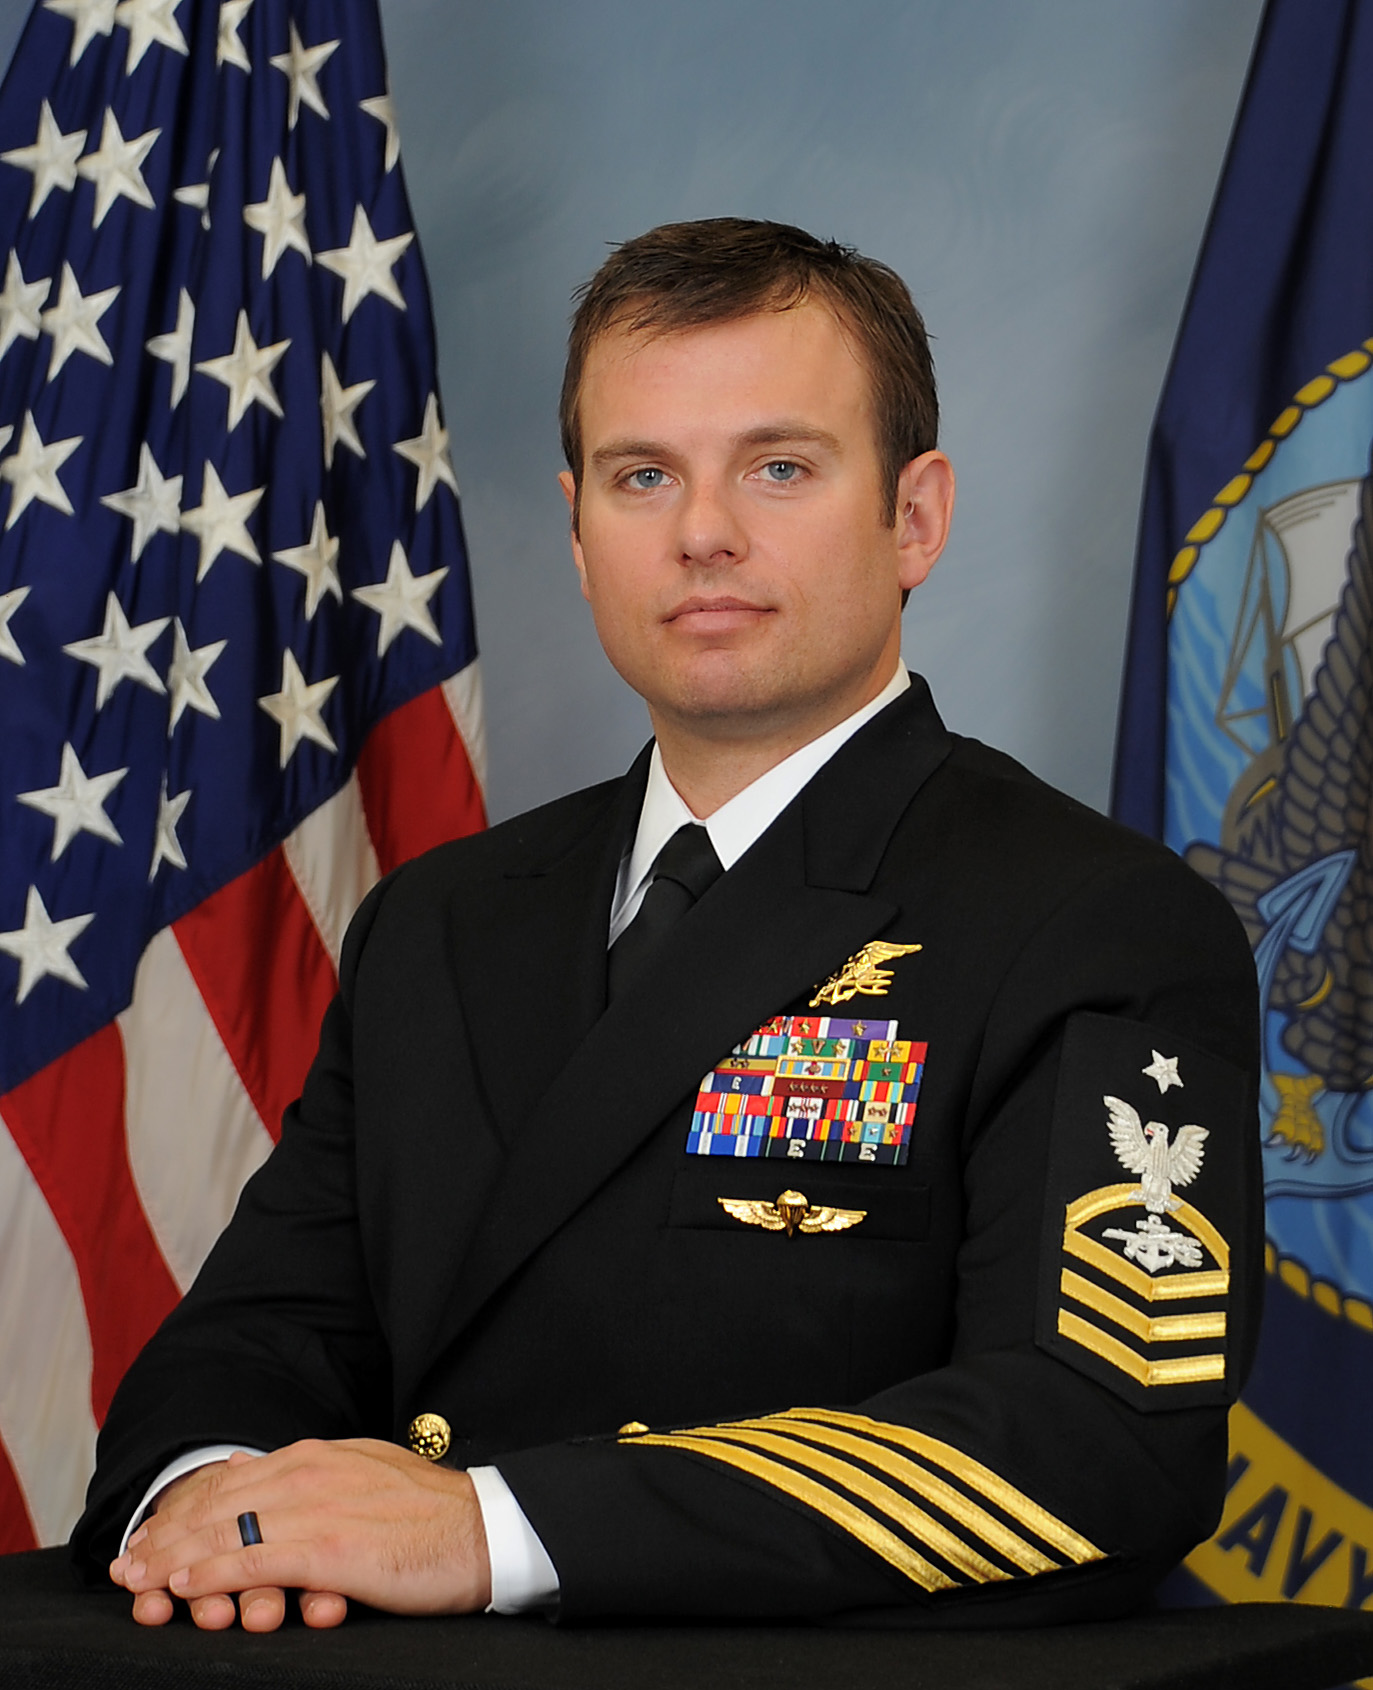 PHOTO: Senior Chief Special Warfare Operator Edward C. Byers Jr. is pictured in a photo released by the the U.S. Navy on Feb. 23, 2016.